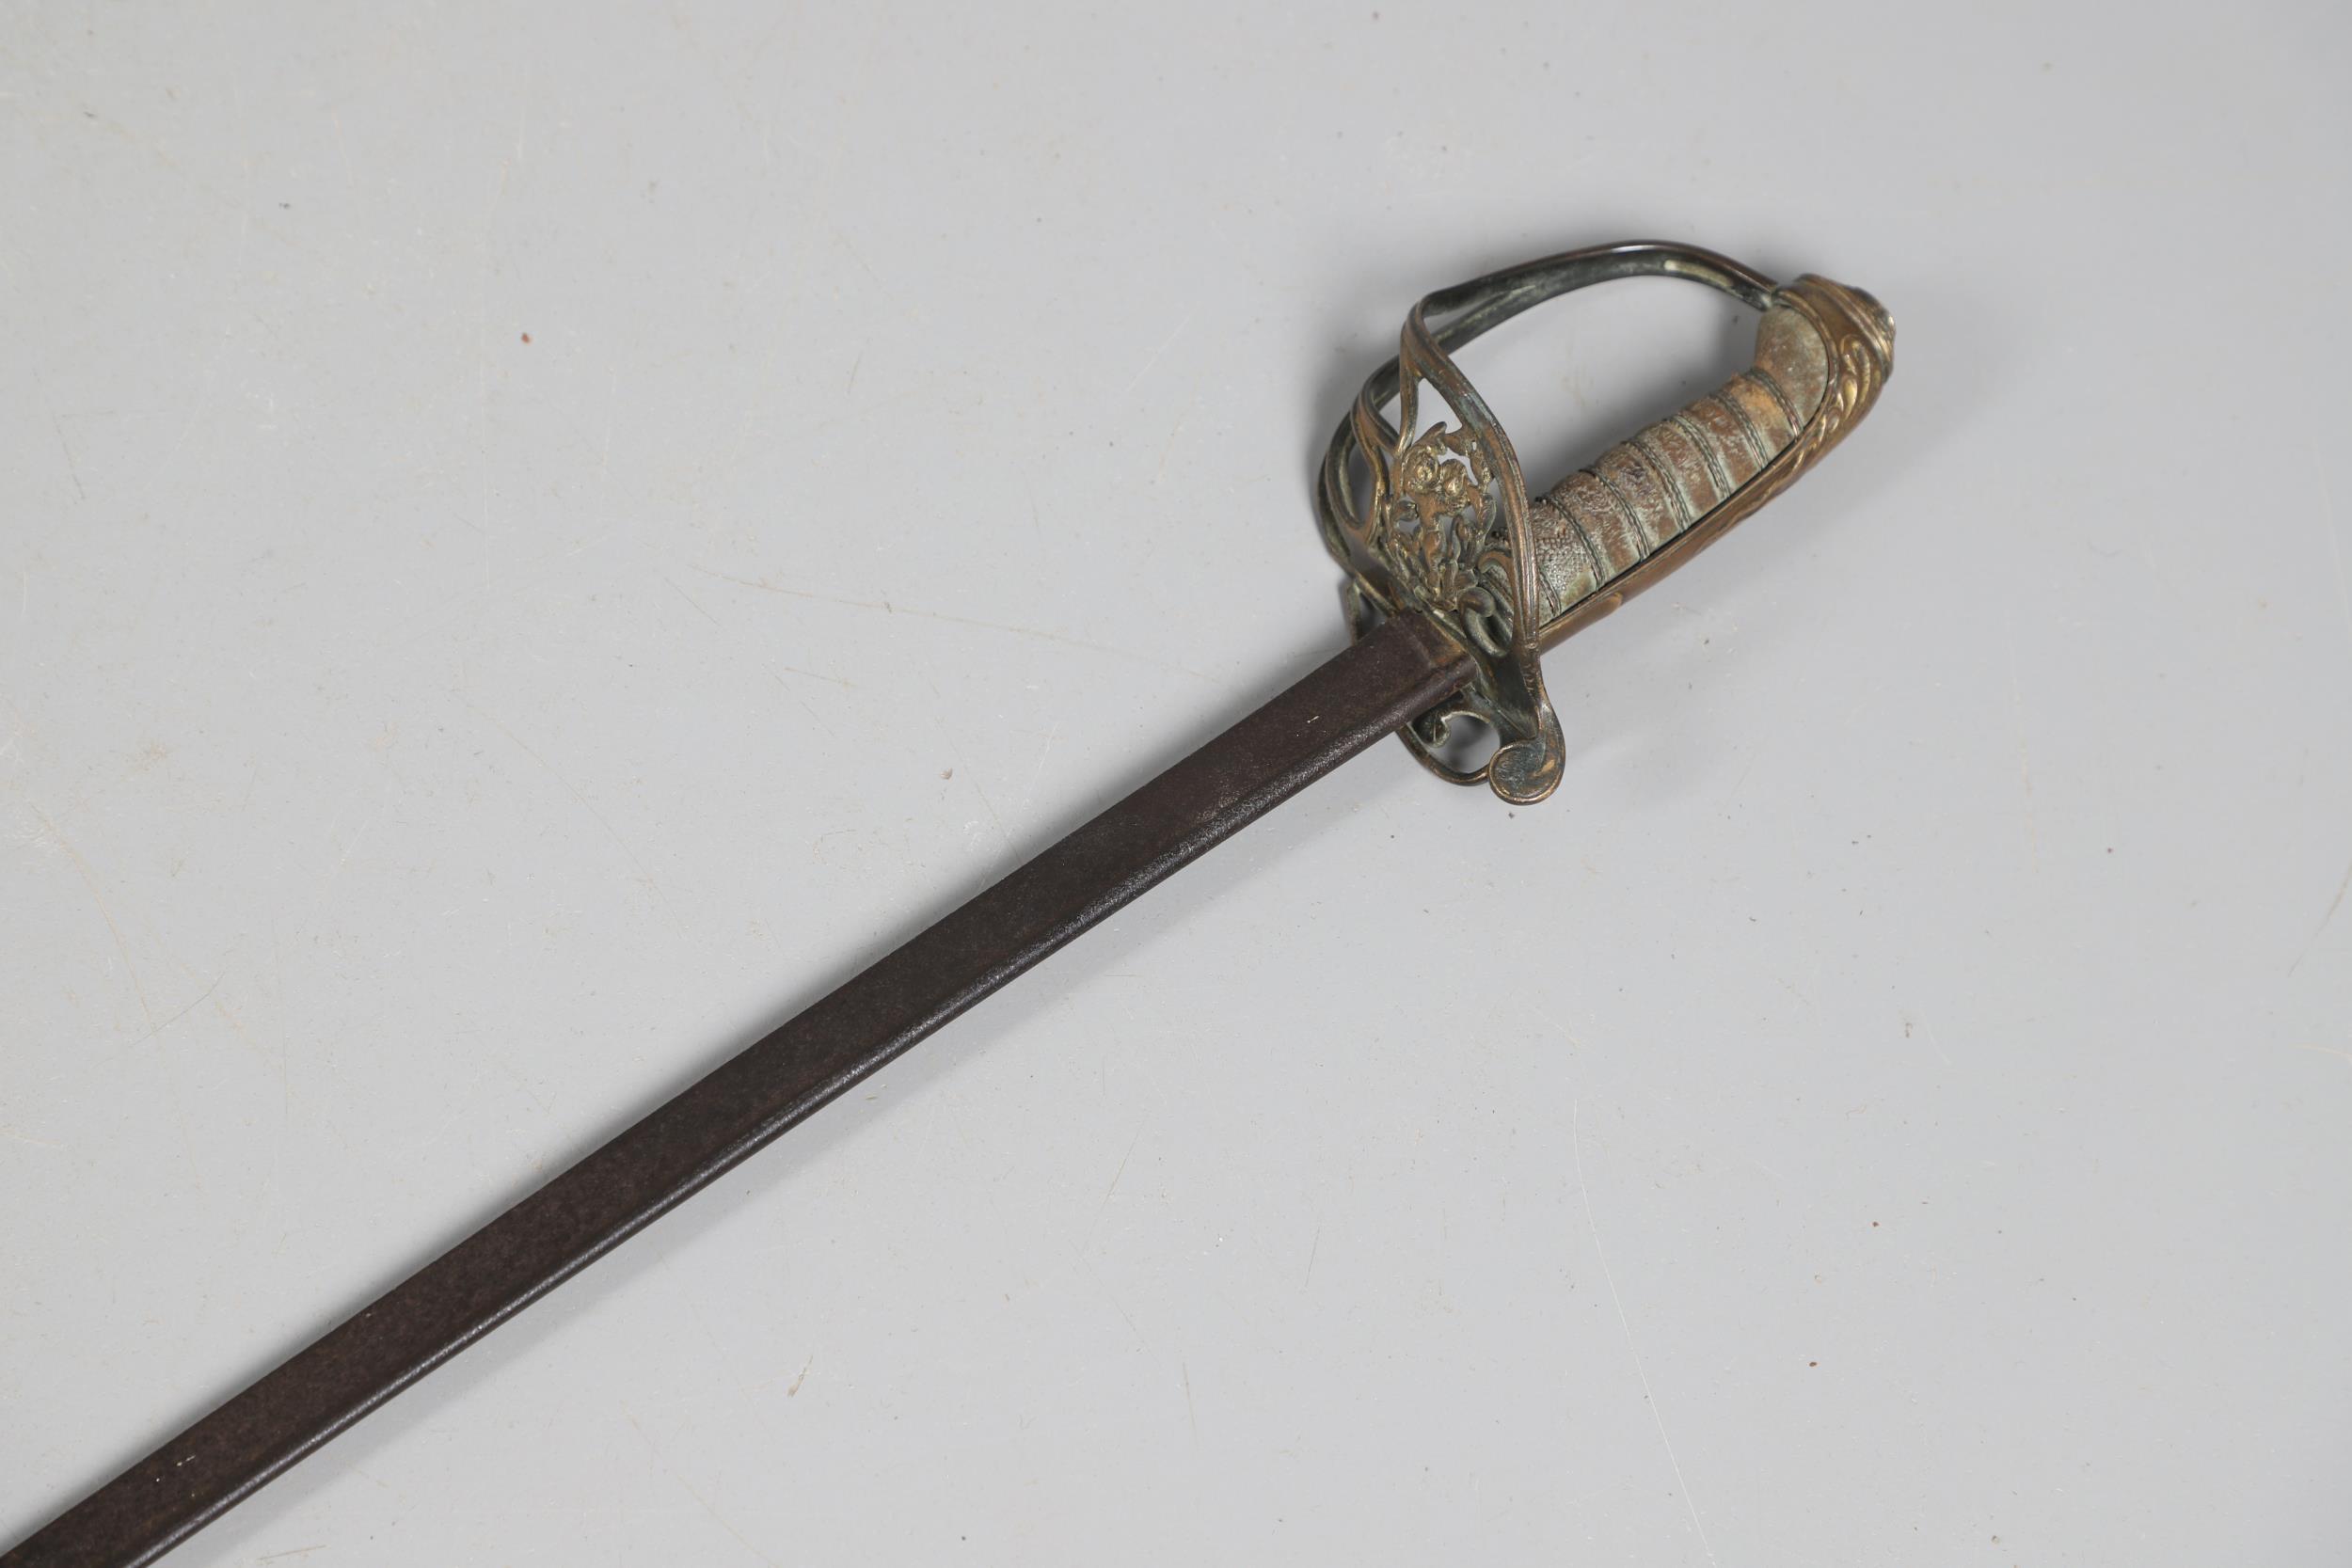 AN EAST INDIA COMPANY OFFICER'S 1822 PATTERN SWORD. - Image 5 of 10